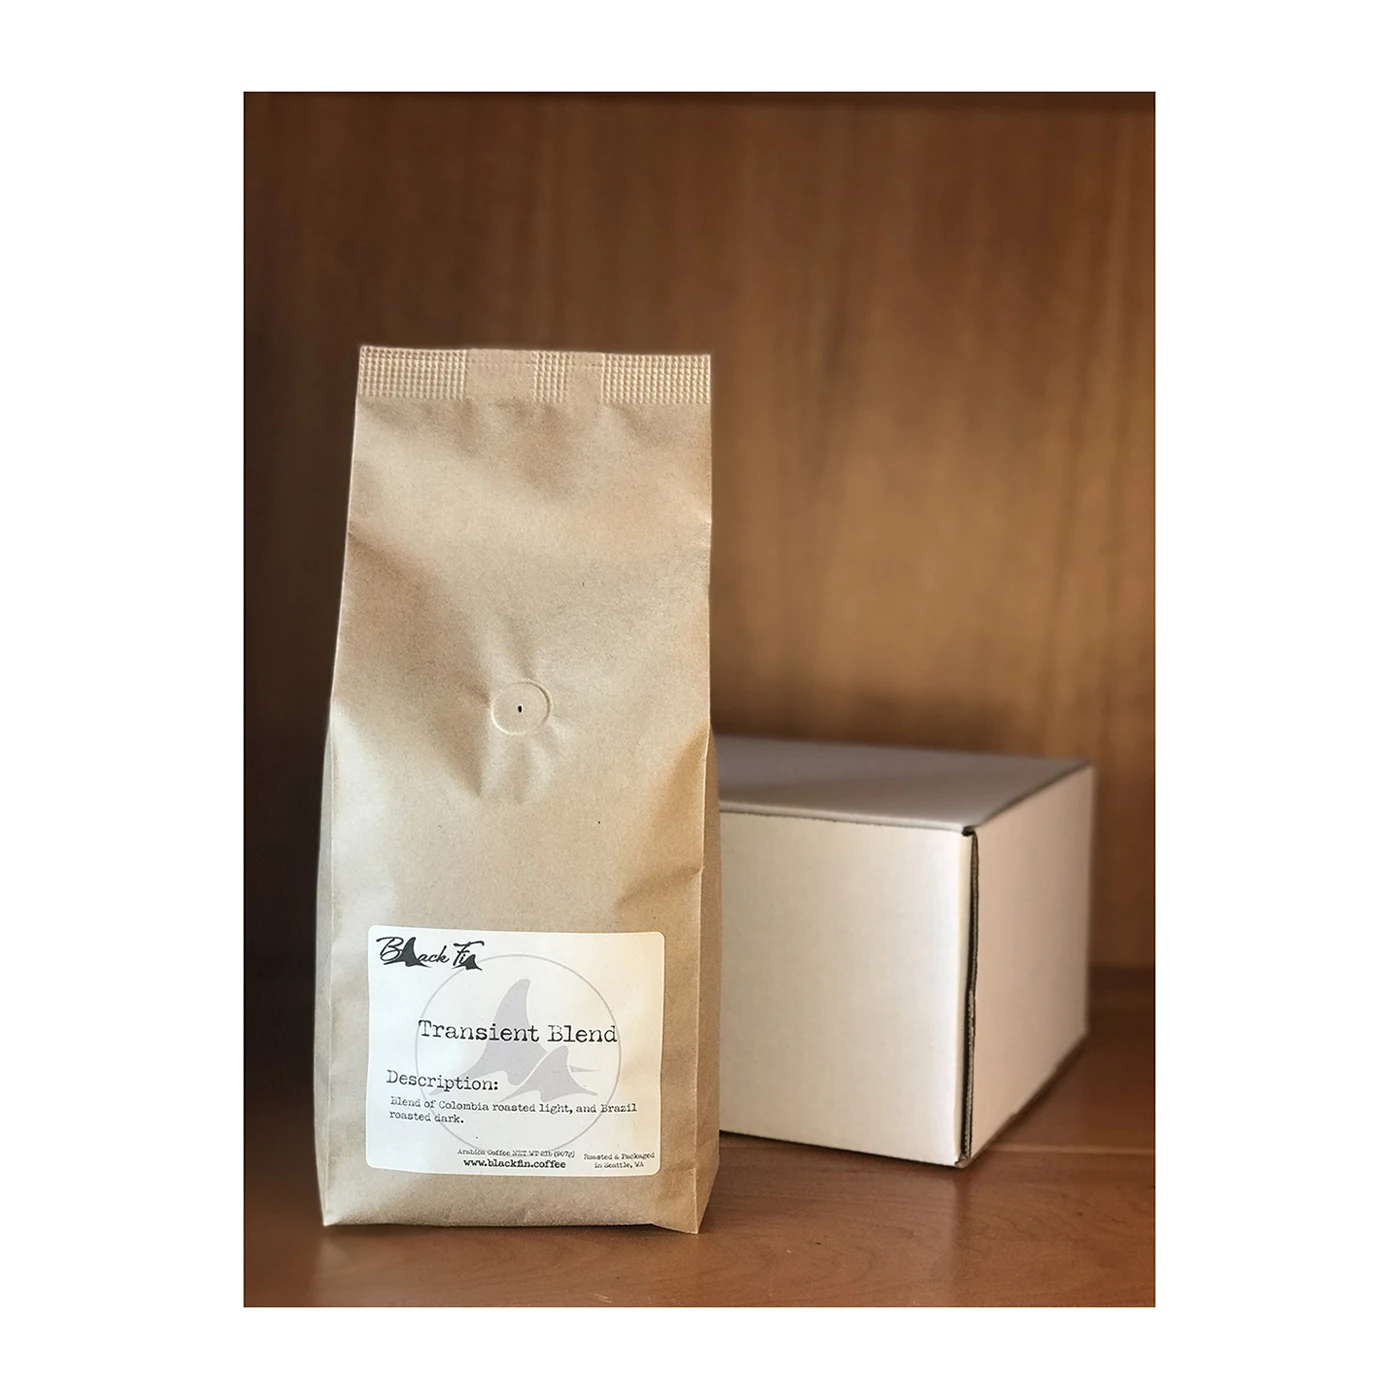 2 Pound Bag Transient Blend Light and Dark Roasted Specialty Q Grade 82-84 Point Arabica Seattle Coffee Roasted Whole Beans